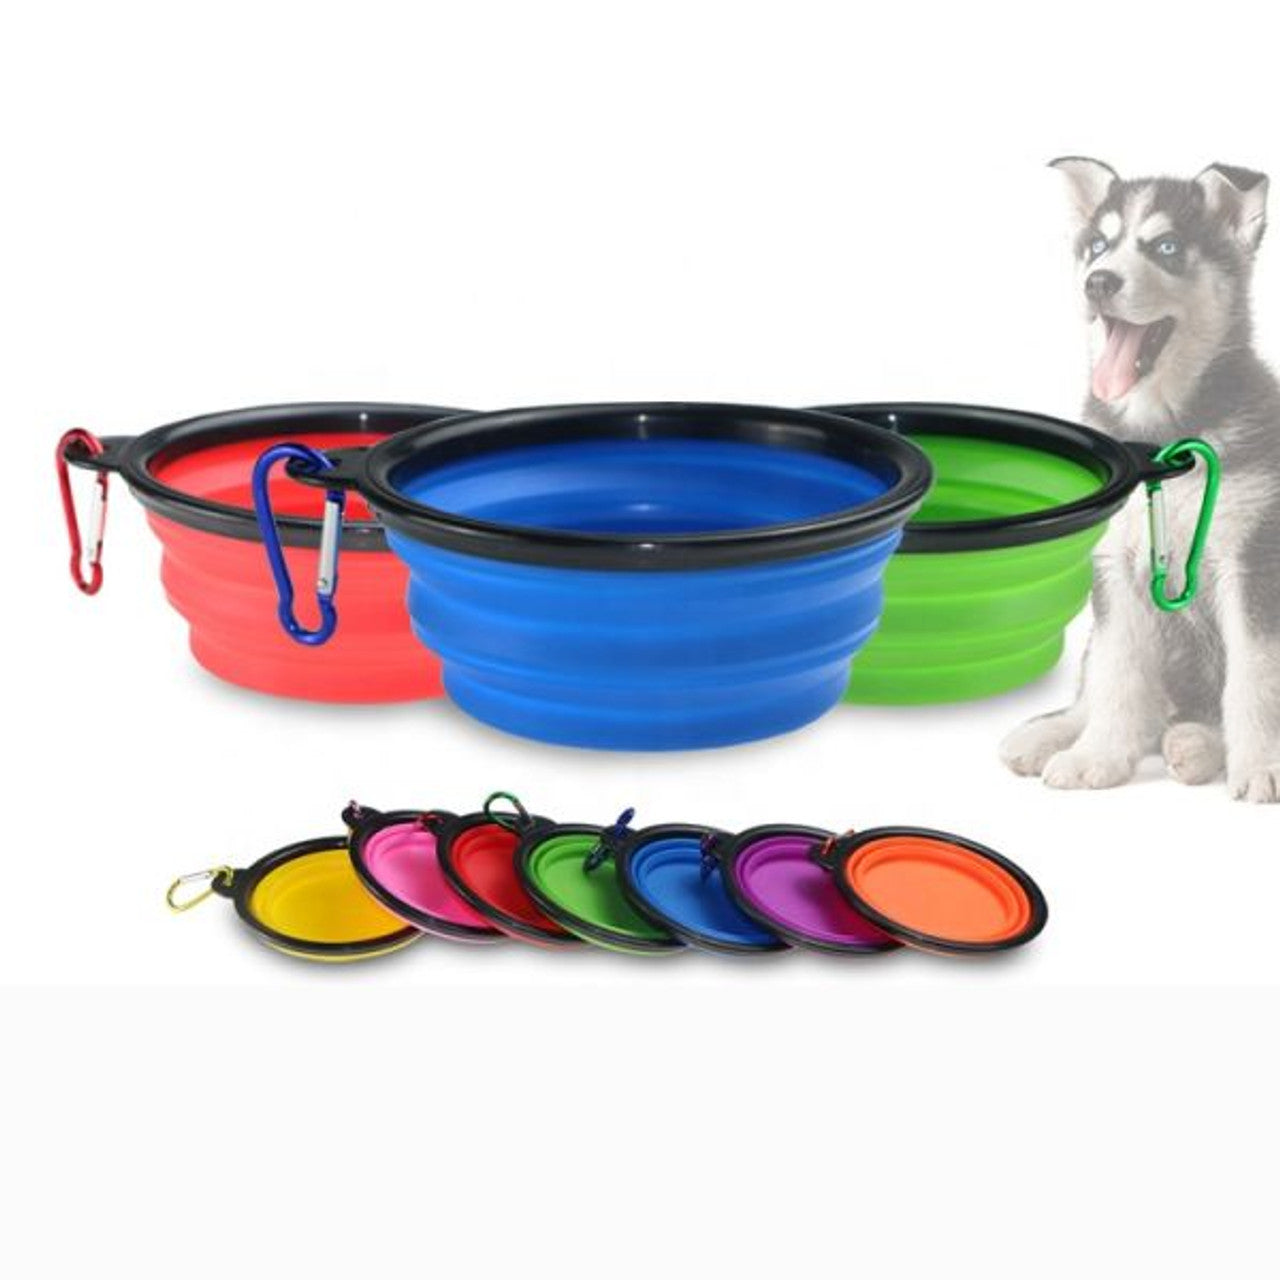 Colapsible Portable Dog Bowl - Pets and More